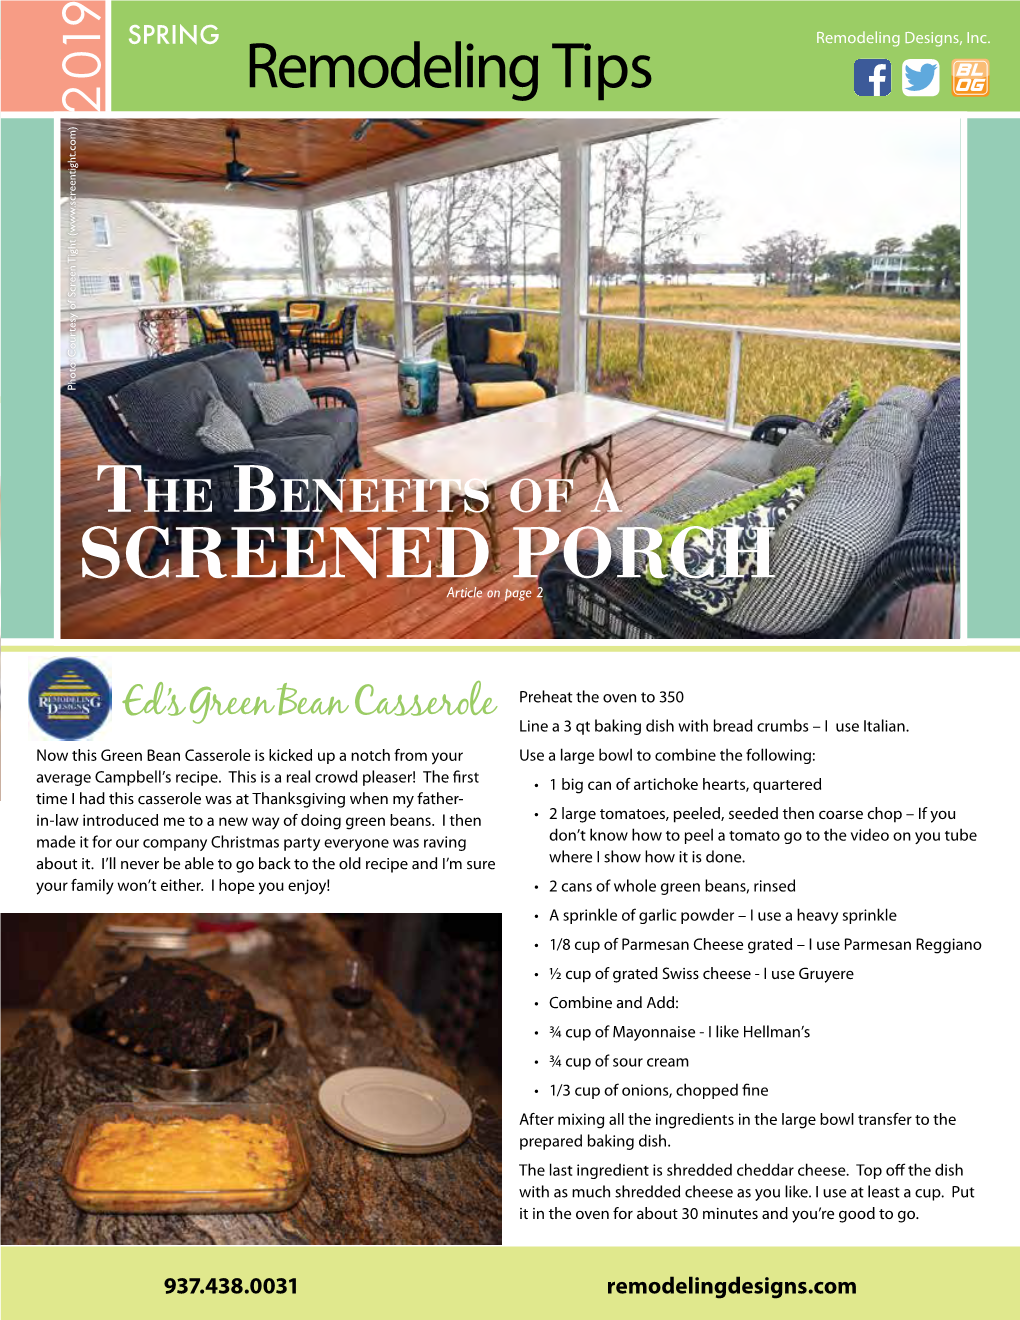 SCREENED PORCH Article on Page 2